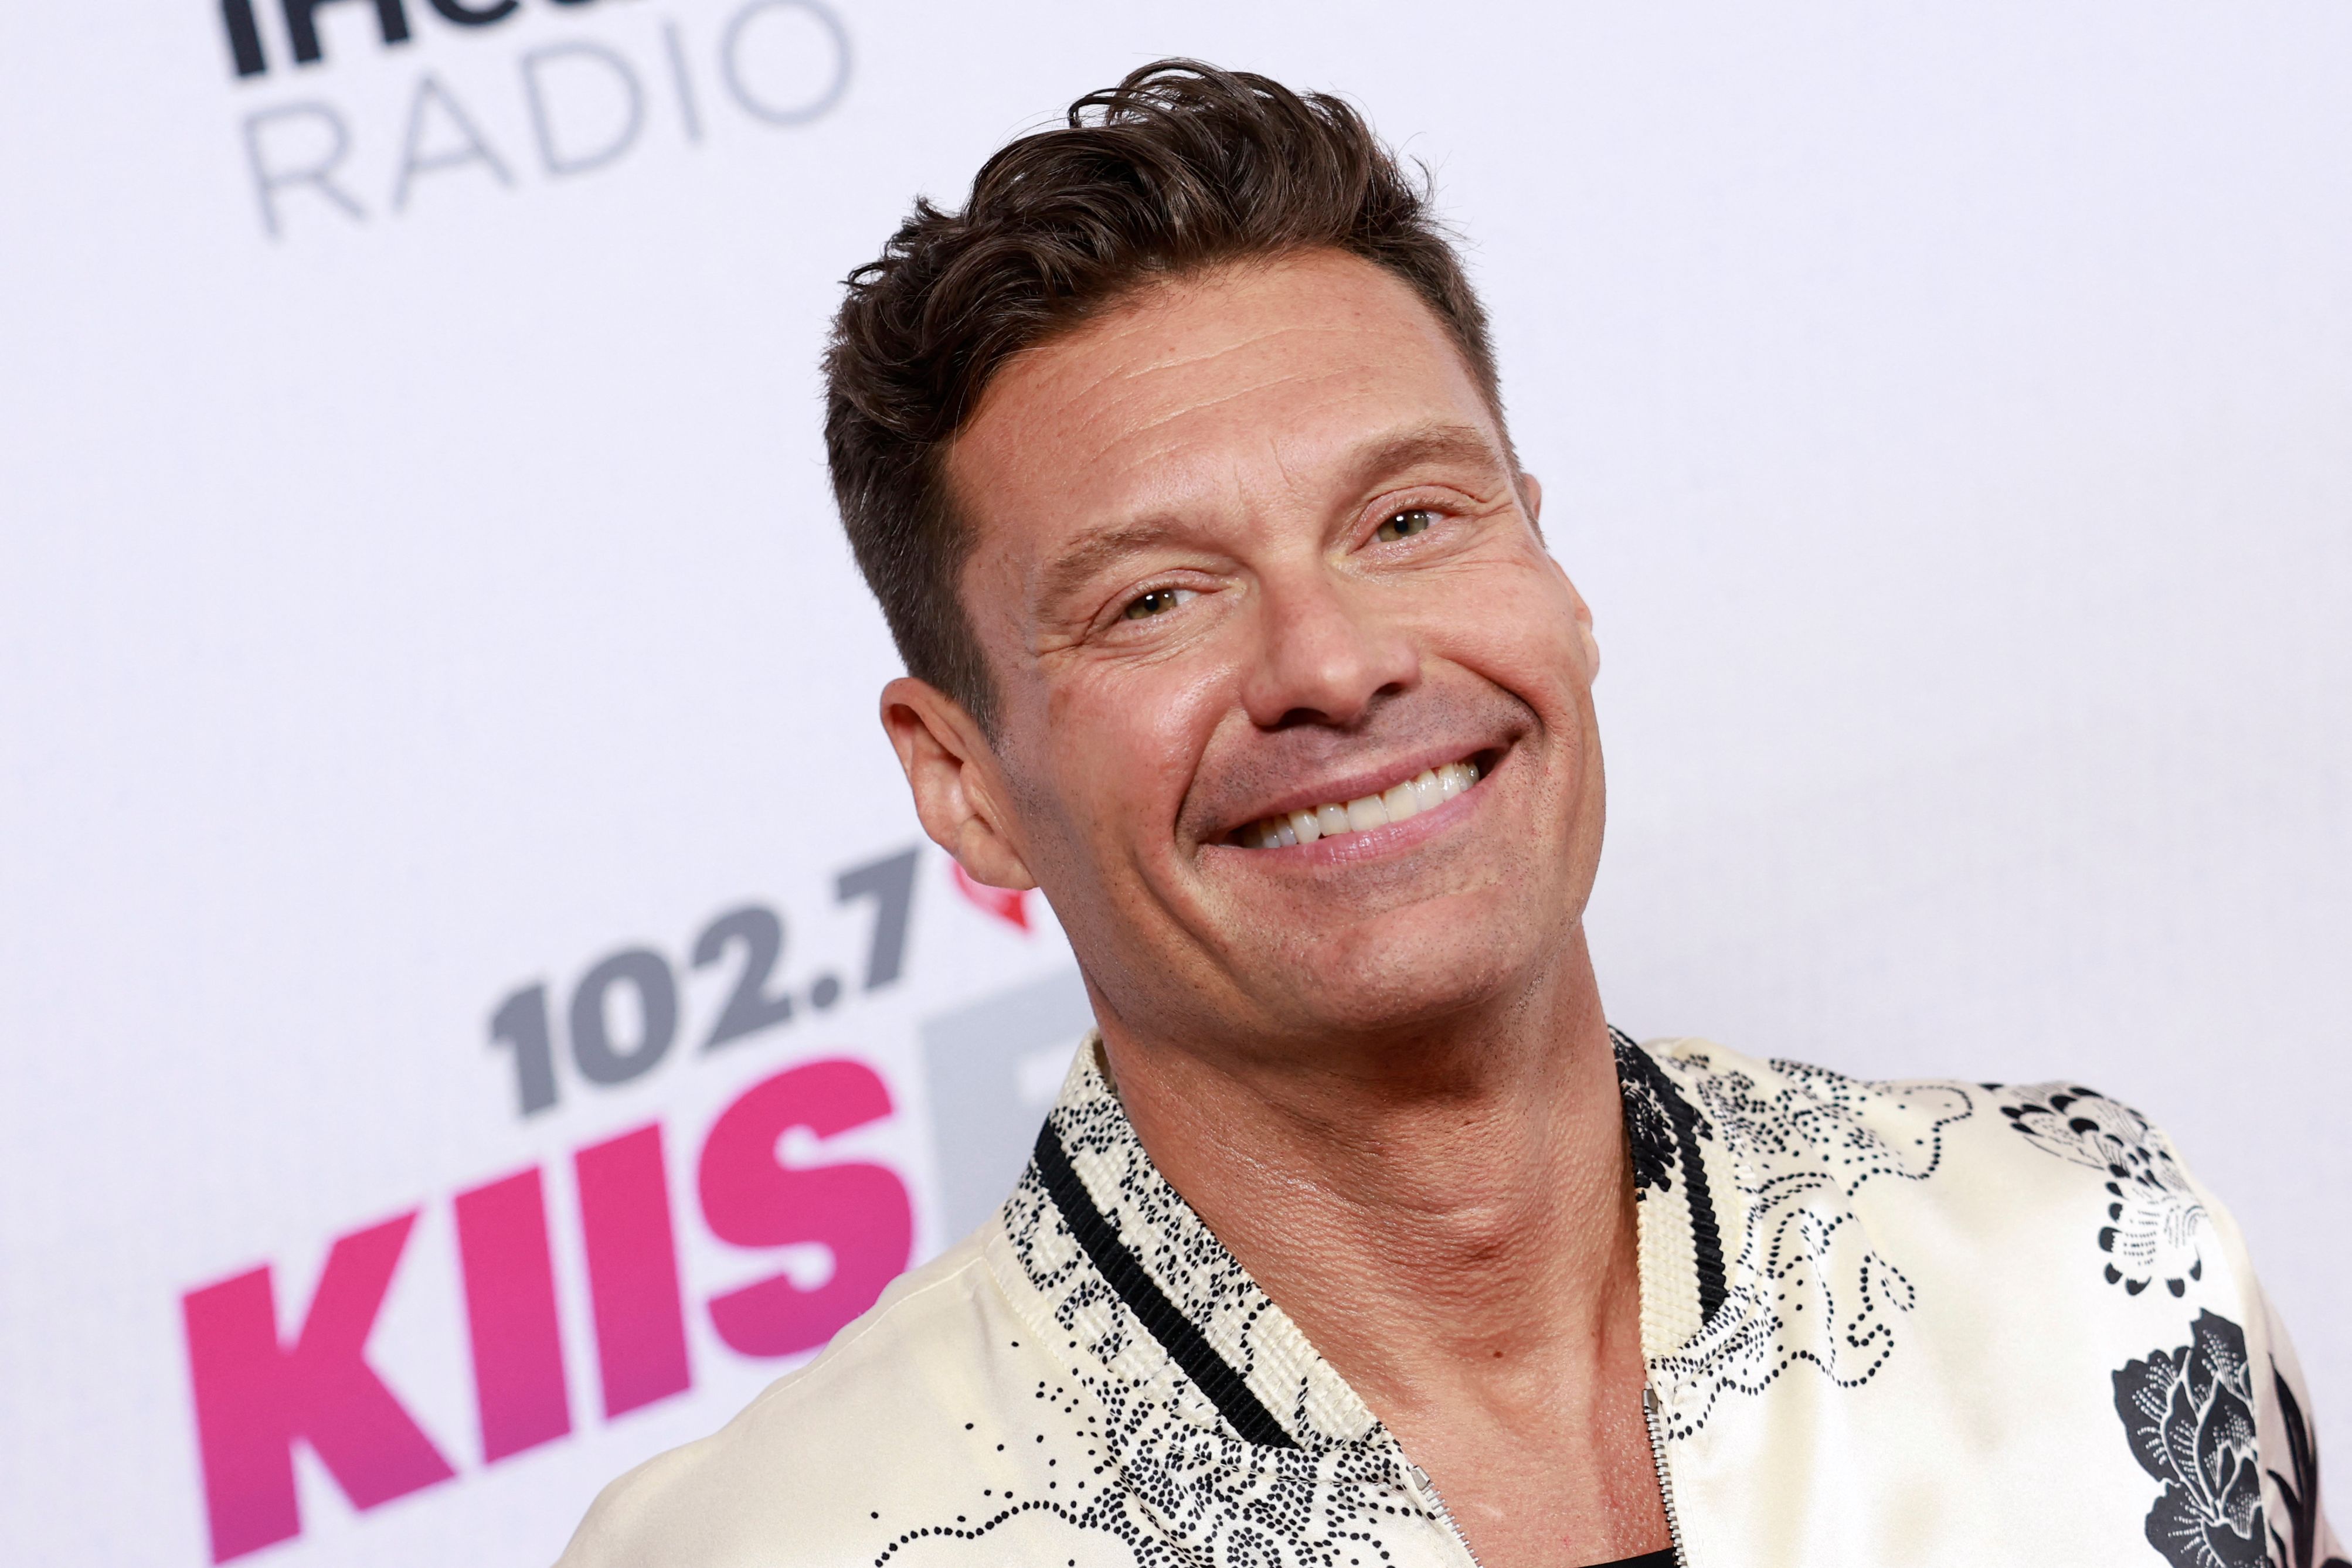 US media personality Ryan Seacrest arrives to attend iHeartRadios KIIS FM Wango Tango at The Dignity Health Sports Park in Los Angeles on June 4, 2022. | Source: Getty Images